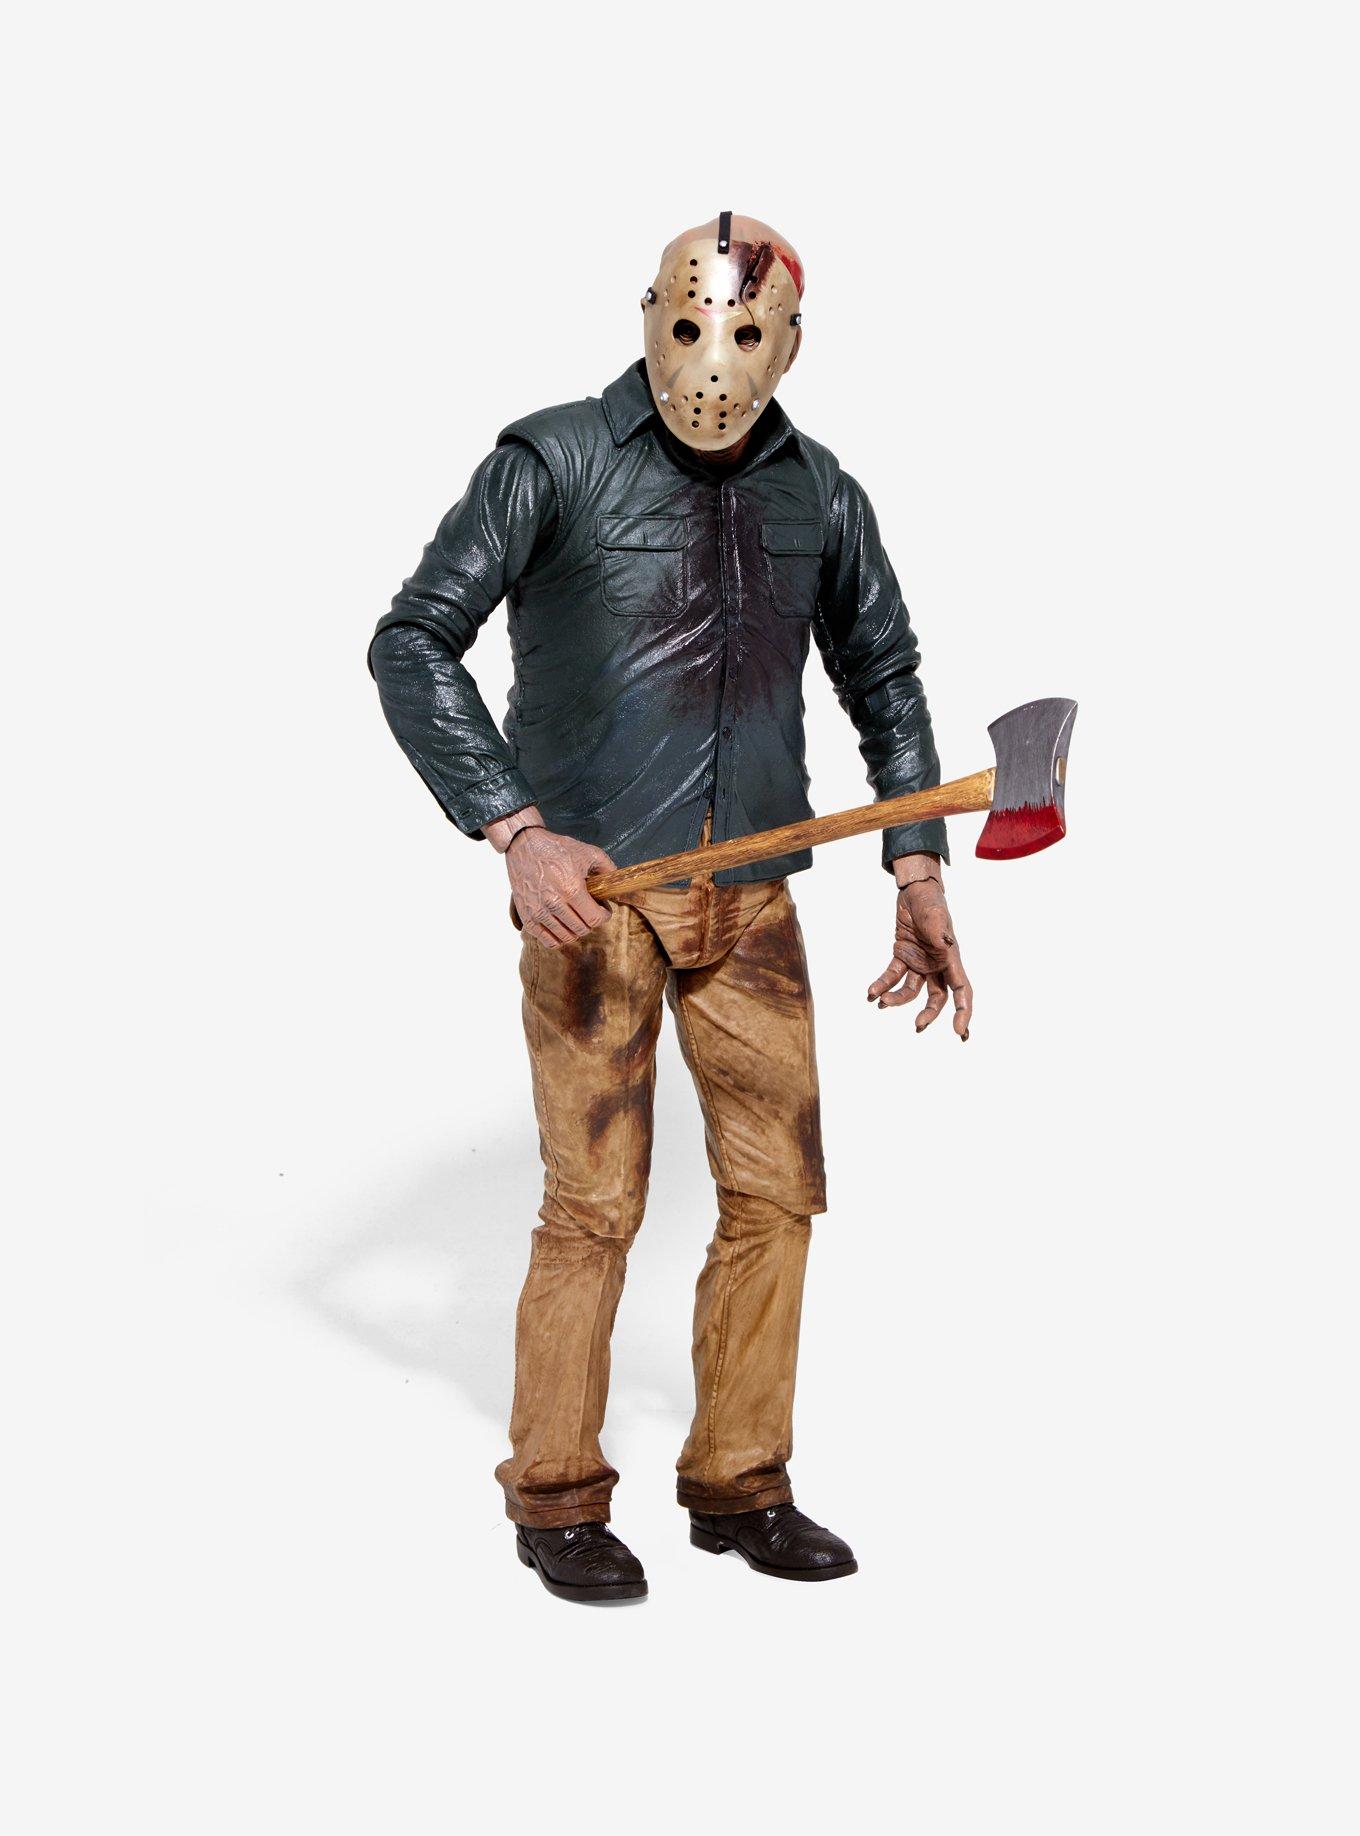 Friday The 13th: The Final Chapter Jason 1:4 Scale Action Figure, , alternate